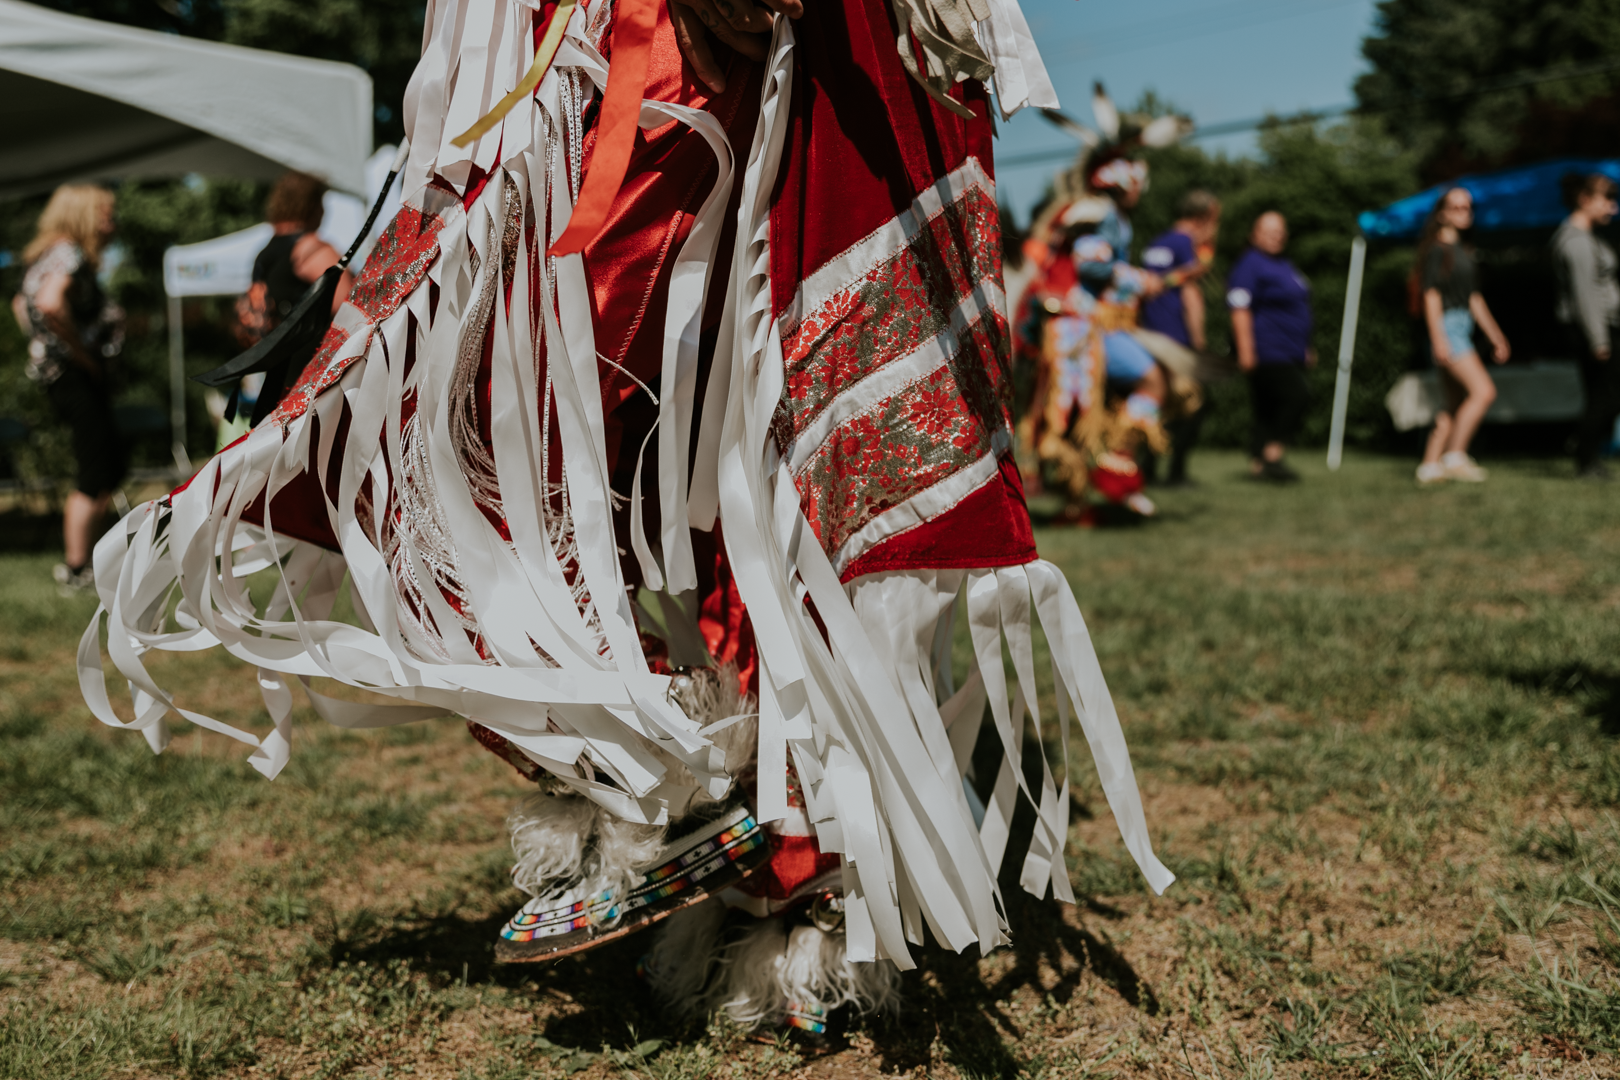 A close-up of traditional Indigenous regalia during movement.